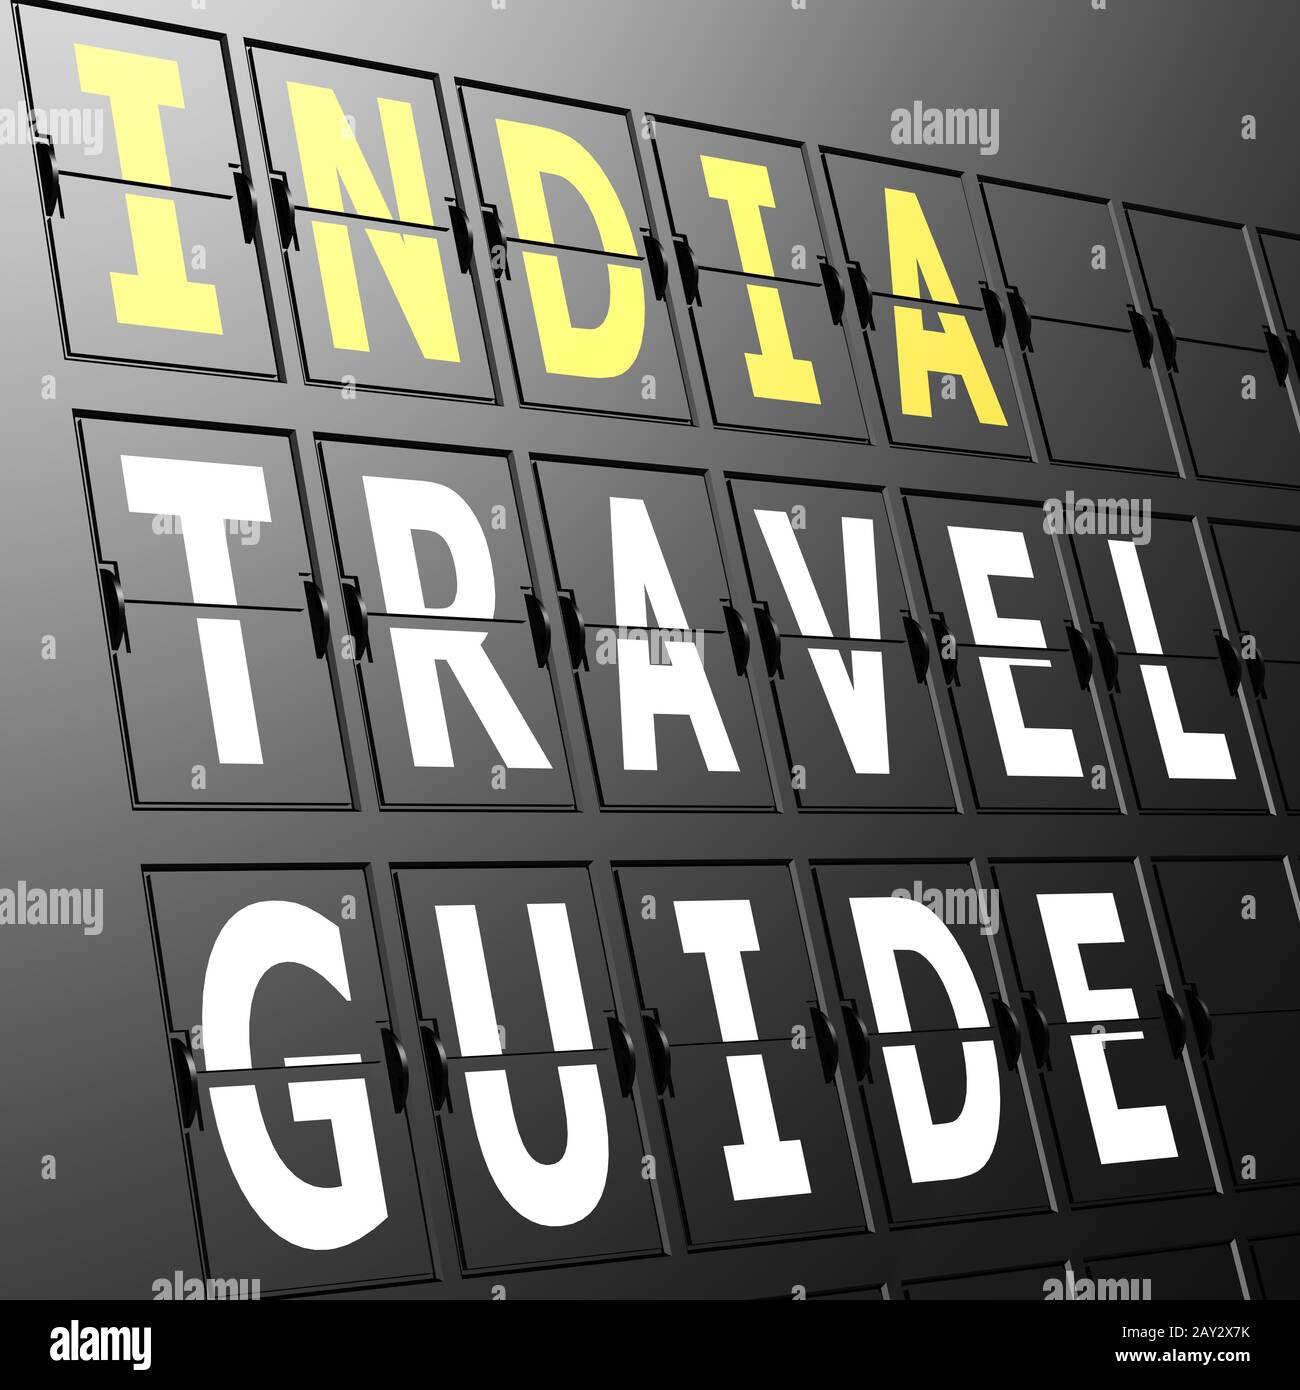 Airport display India travel guide Stock Photo